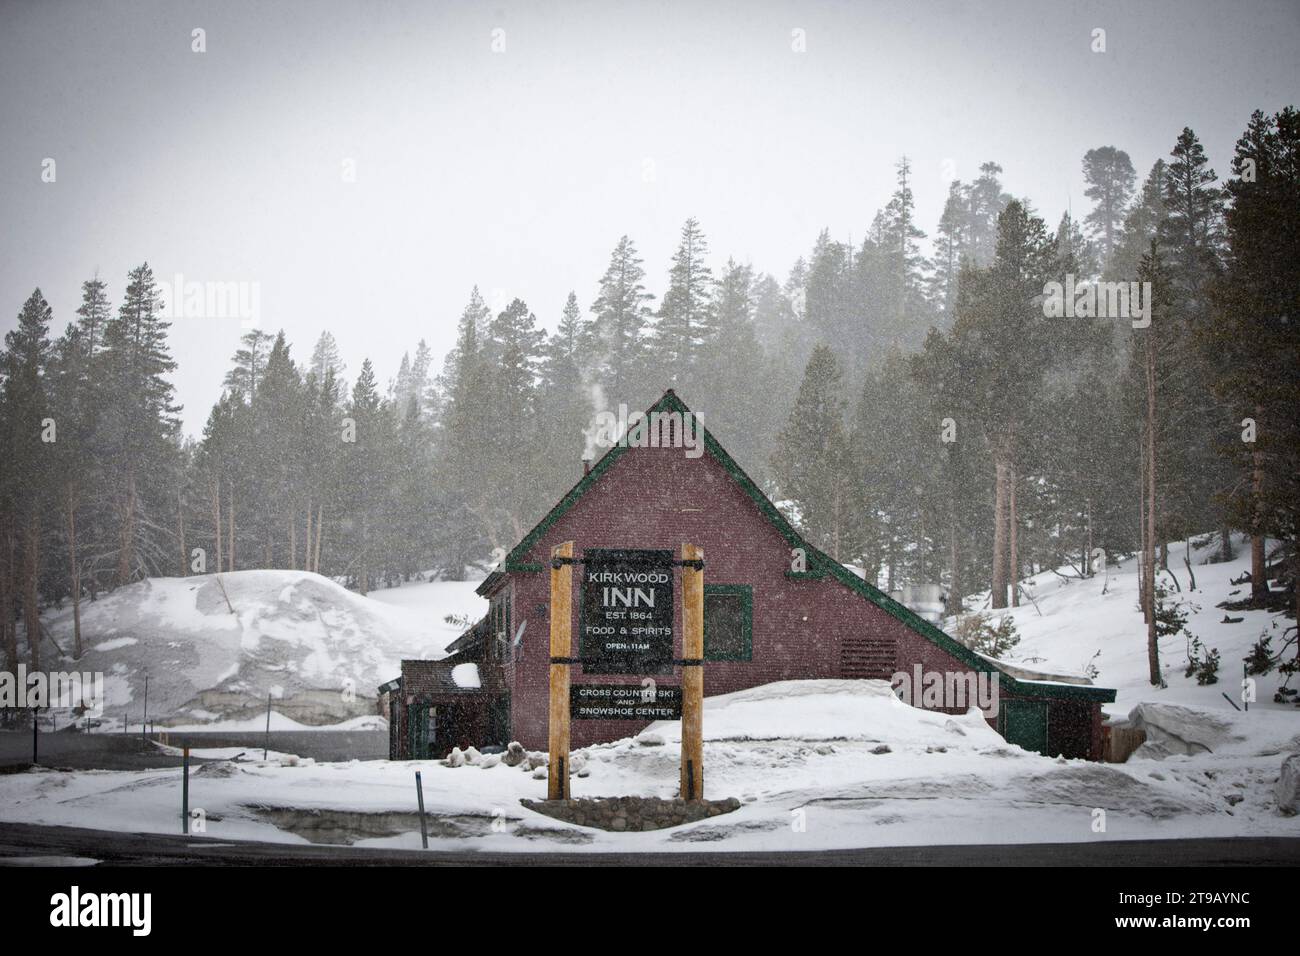 Old lodge / inn during a snow storm. Stock Photo